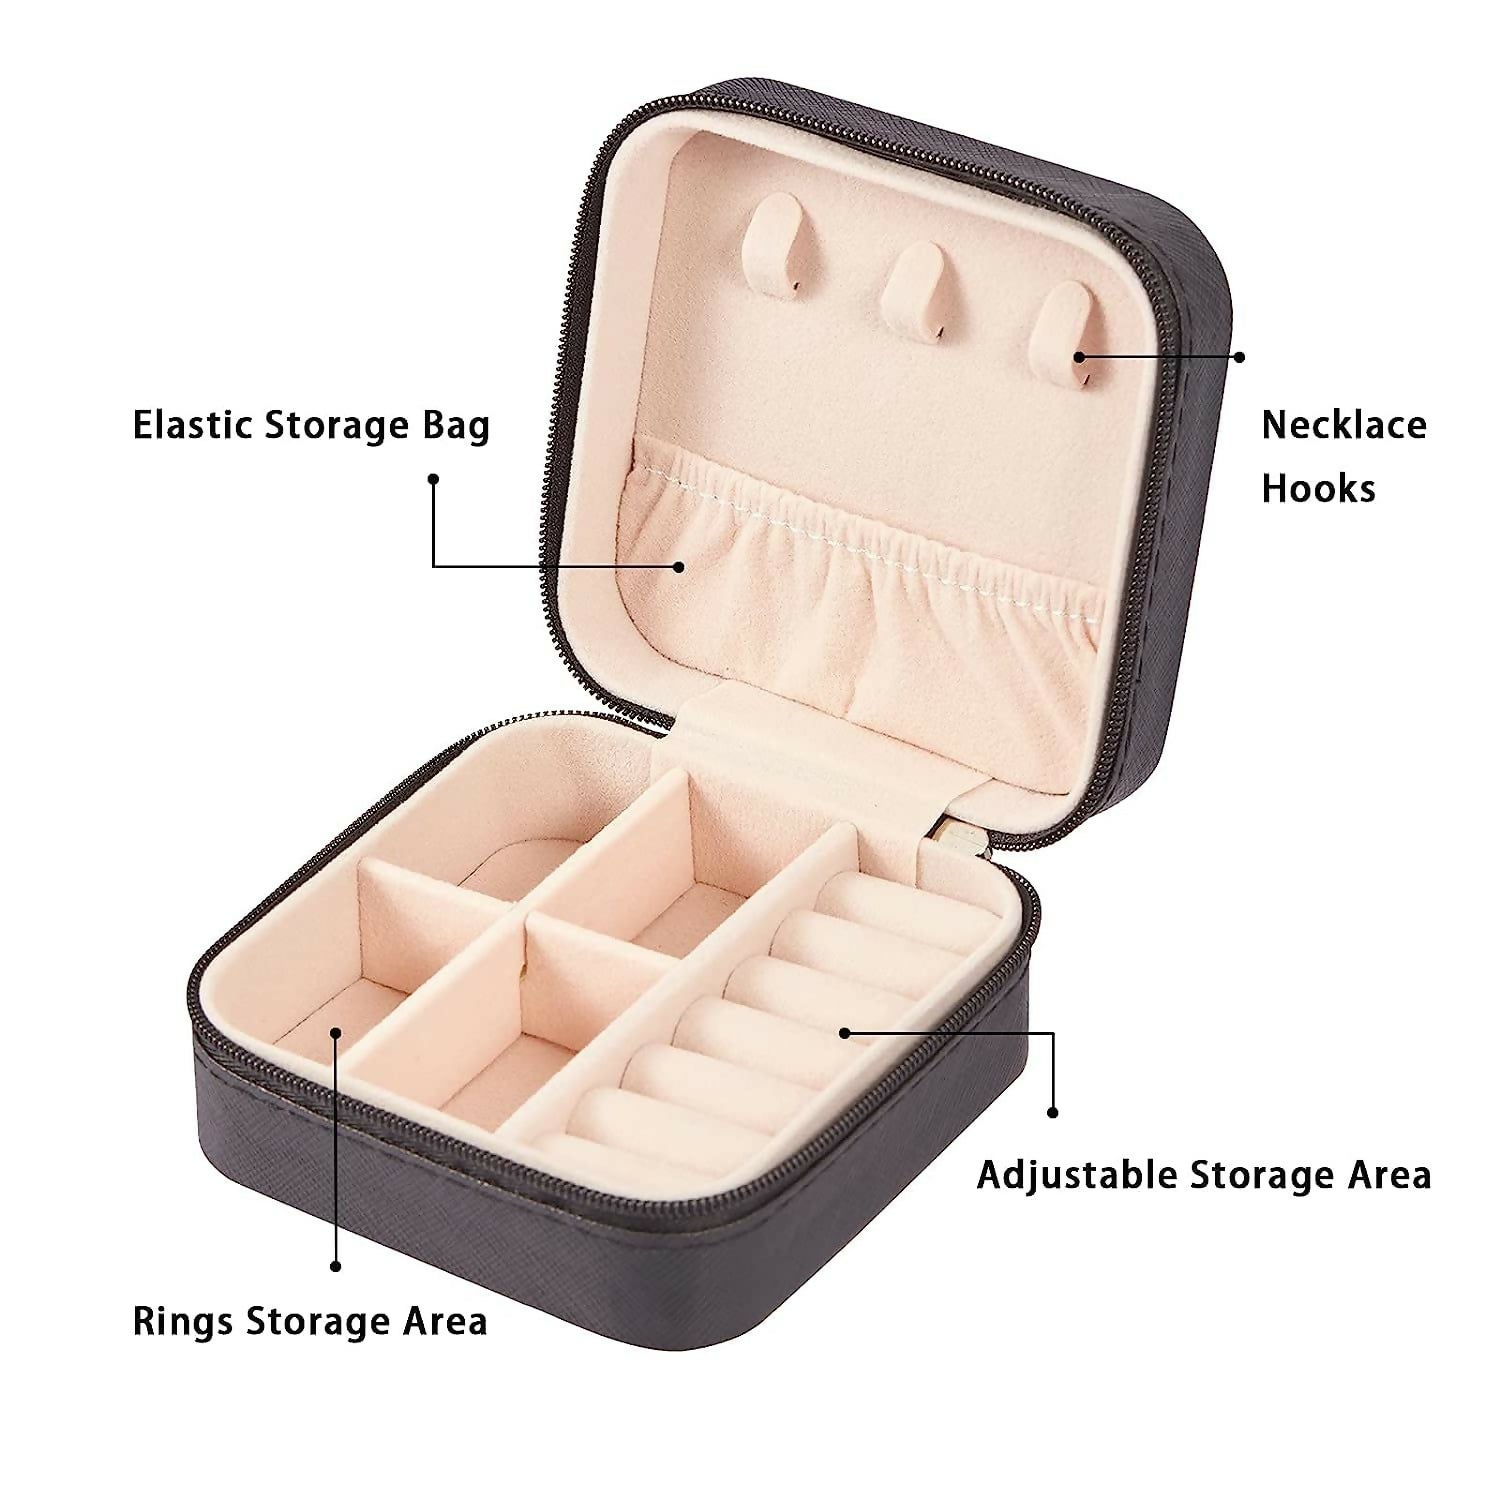 Jewelry Organizer Box for Travelling Leather Box Hair Accessories PU Leather Small Jewelry Box, Travel Portable Jewelry Case for Ring, Pendant, Earring, Necklace, Bracelet Organizer Storage Holder Boxes Mini Jewelry Box Girls Women